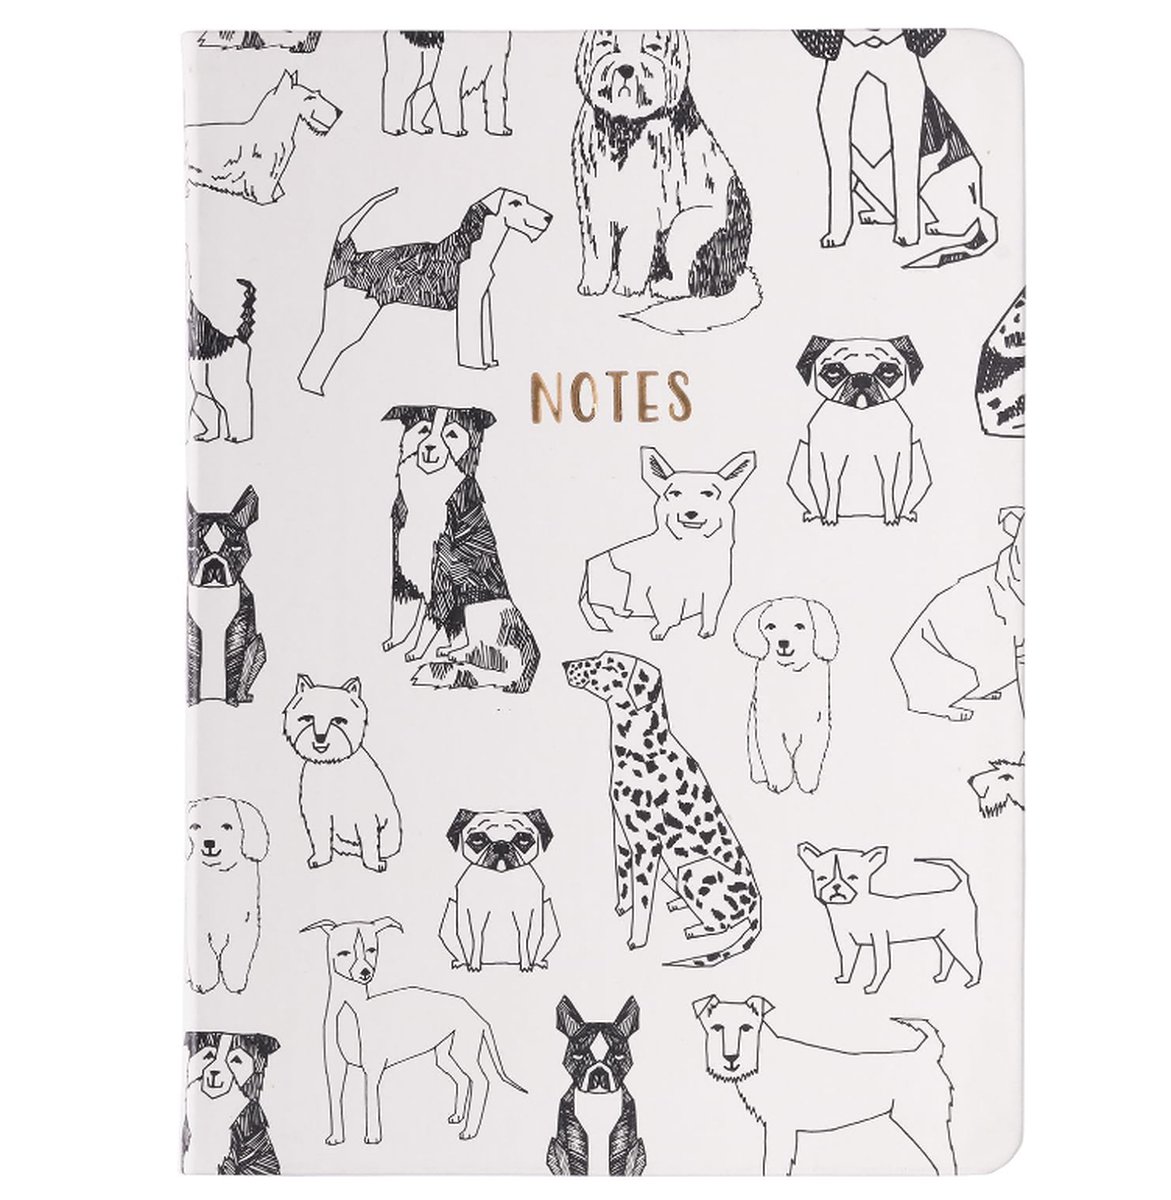 Eccolo Medium Lined Journal Notebook, Flexi Cover, A5 Writing Journal, 256 Ruled Ivory Pages, Ribbon Bookmark, Lay Flat, Notebook for Work or School, Dogs (20.96 x 14.61 x 1.02 cm)